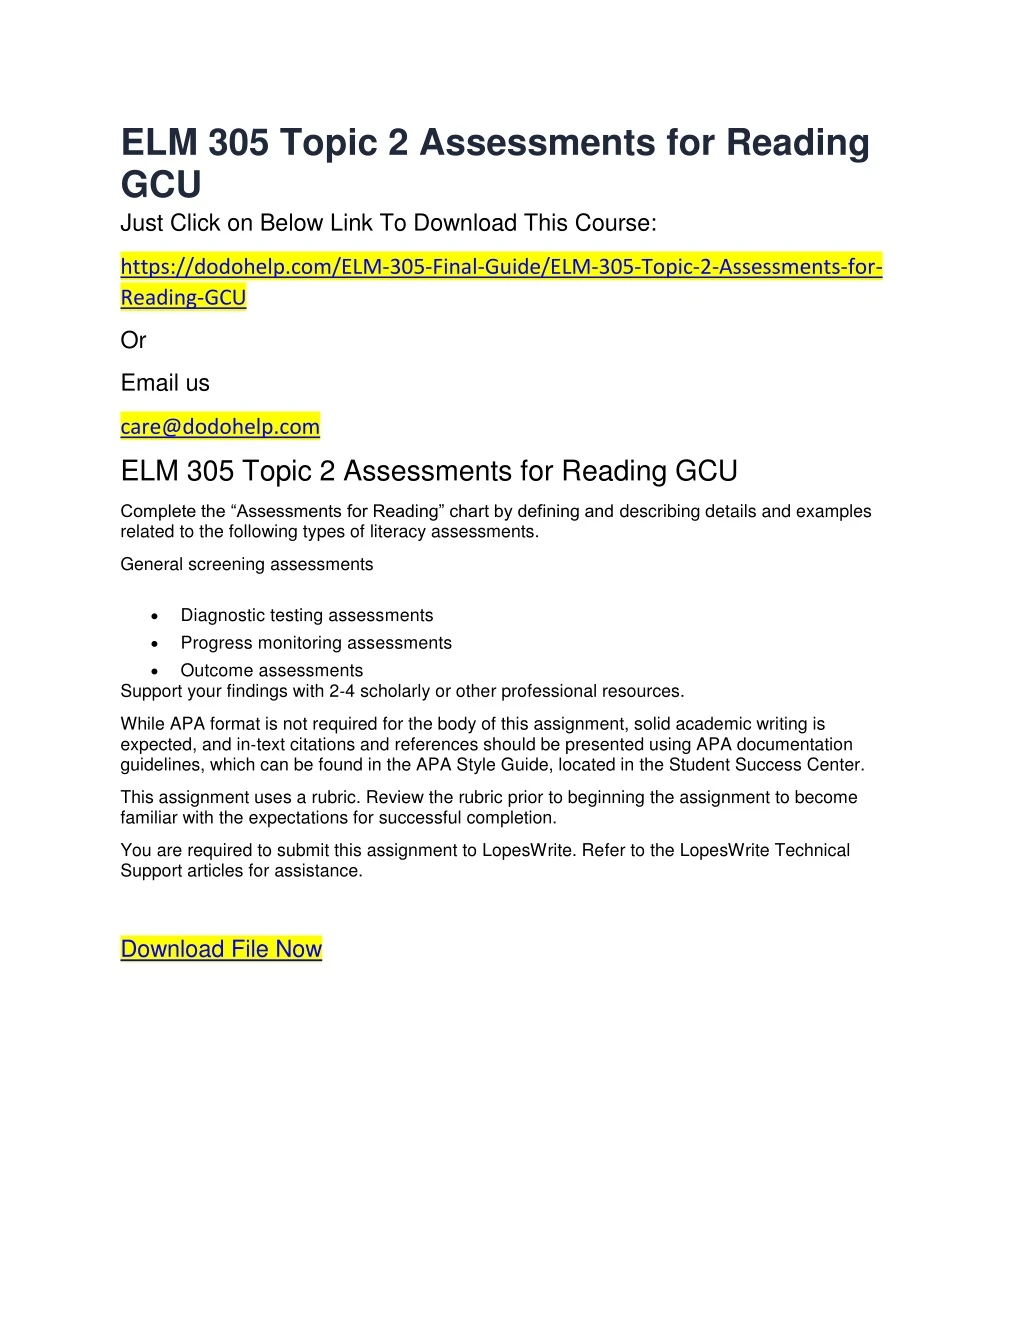 elm 305 topic 2 assessments for reading gcu just